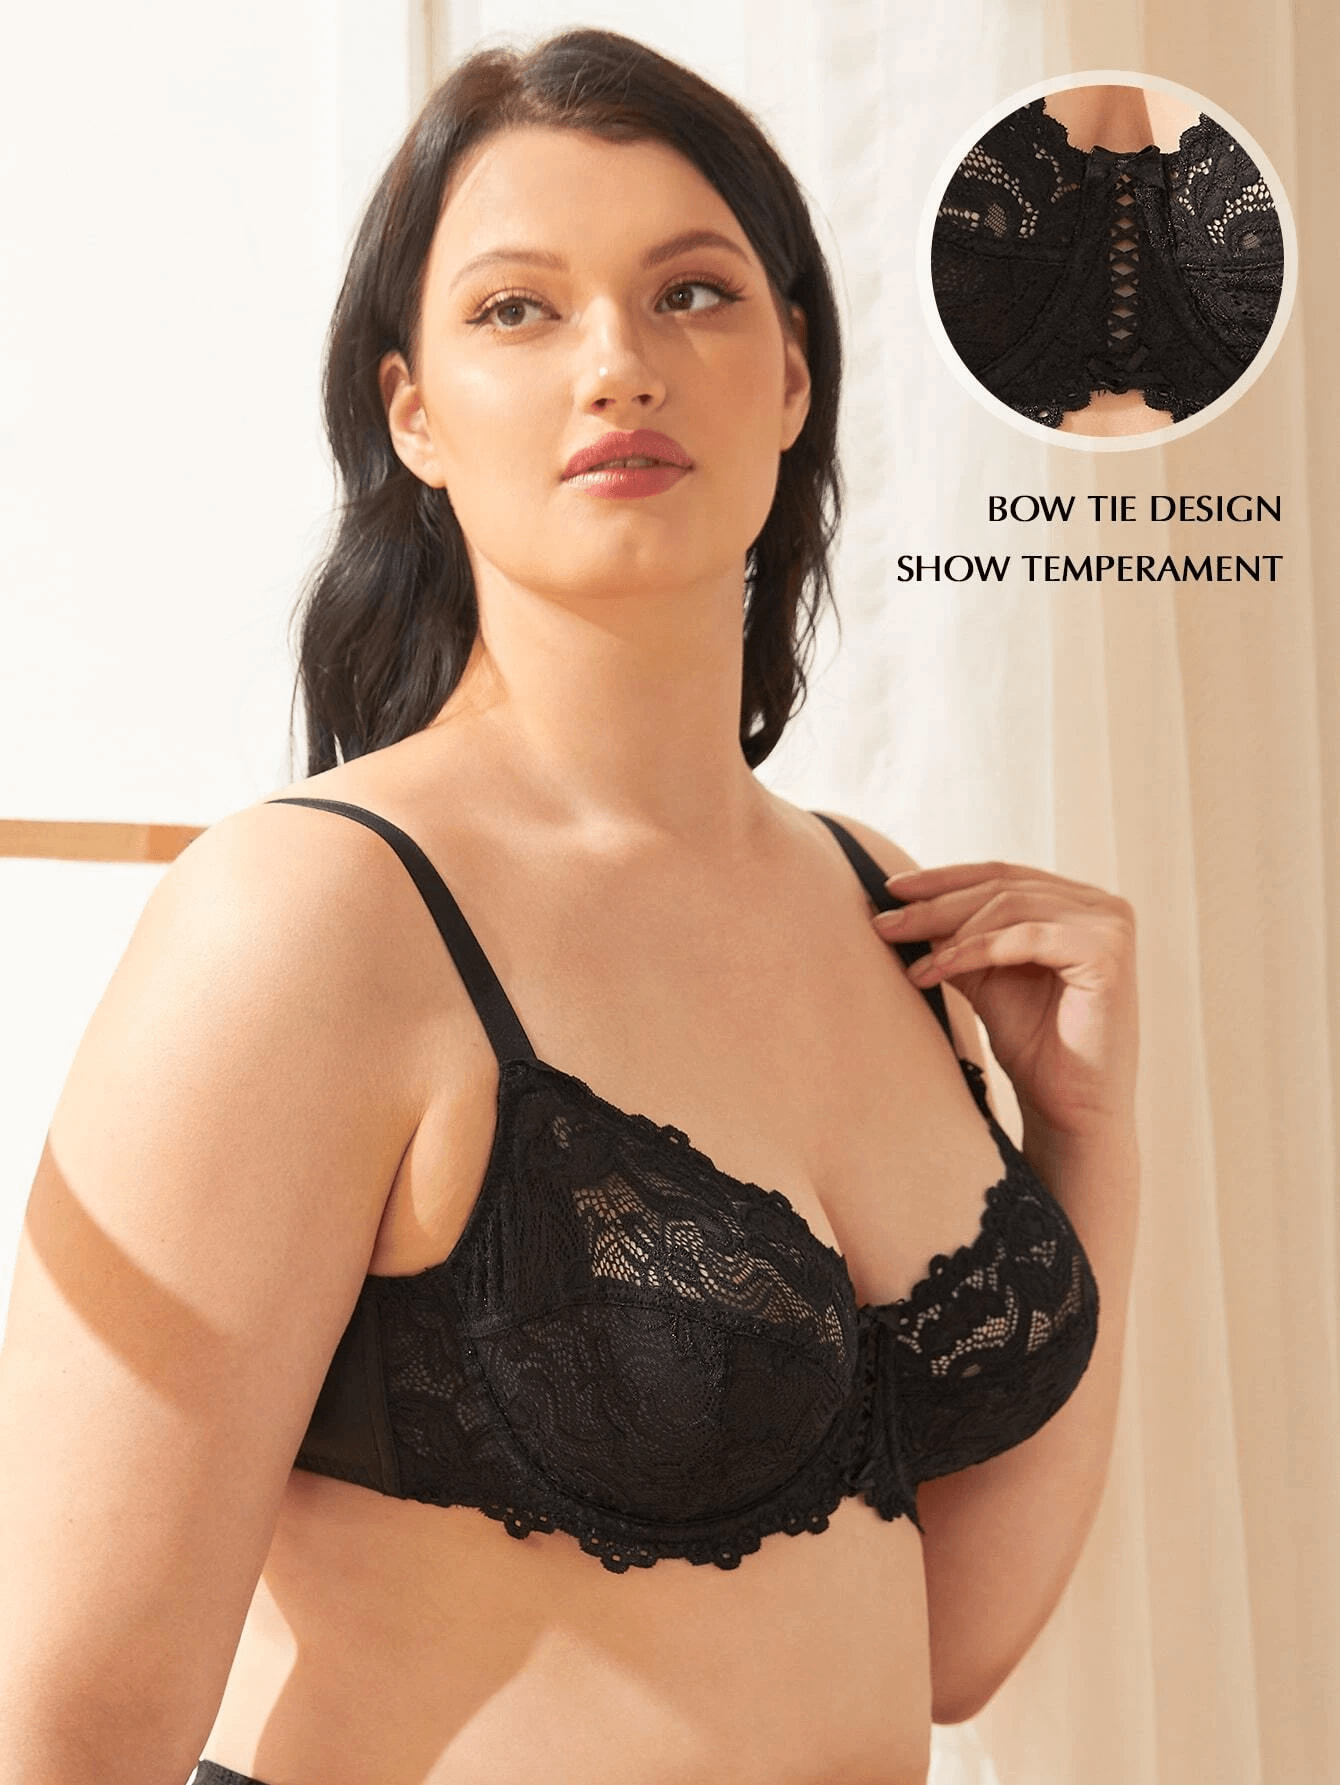 Supportive Plus Size Bras For Women